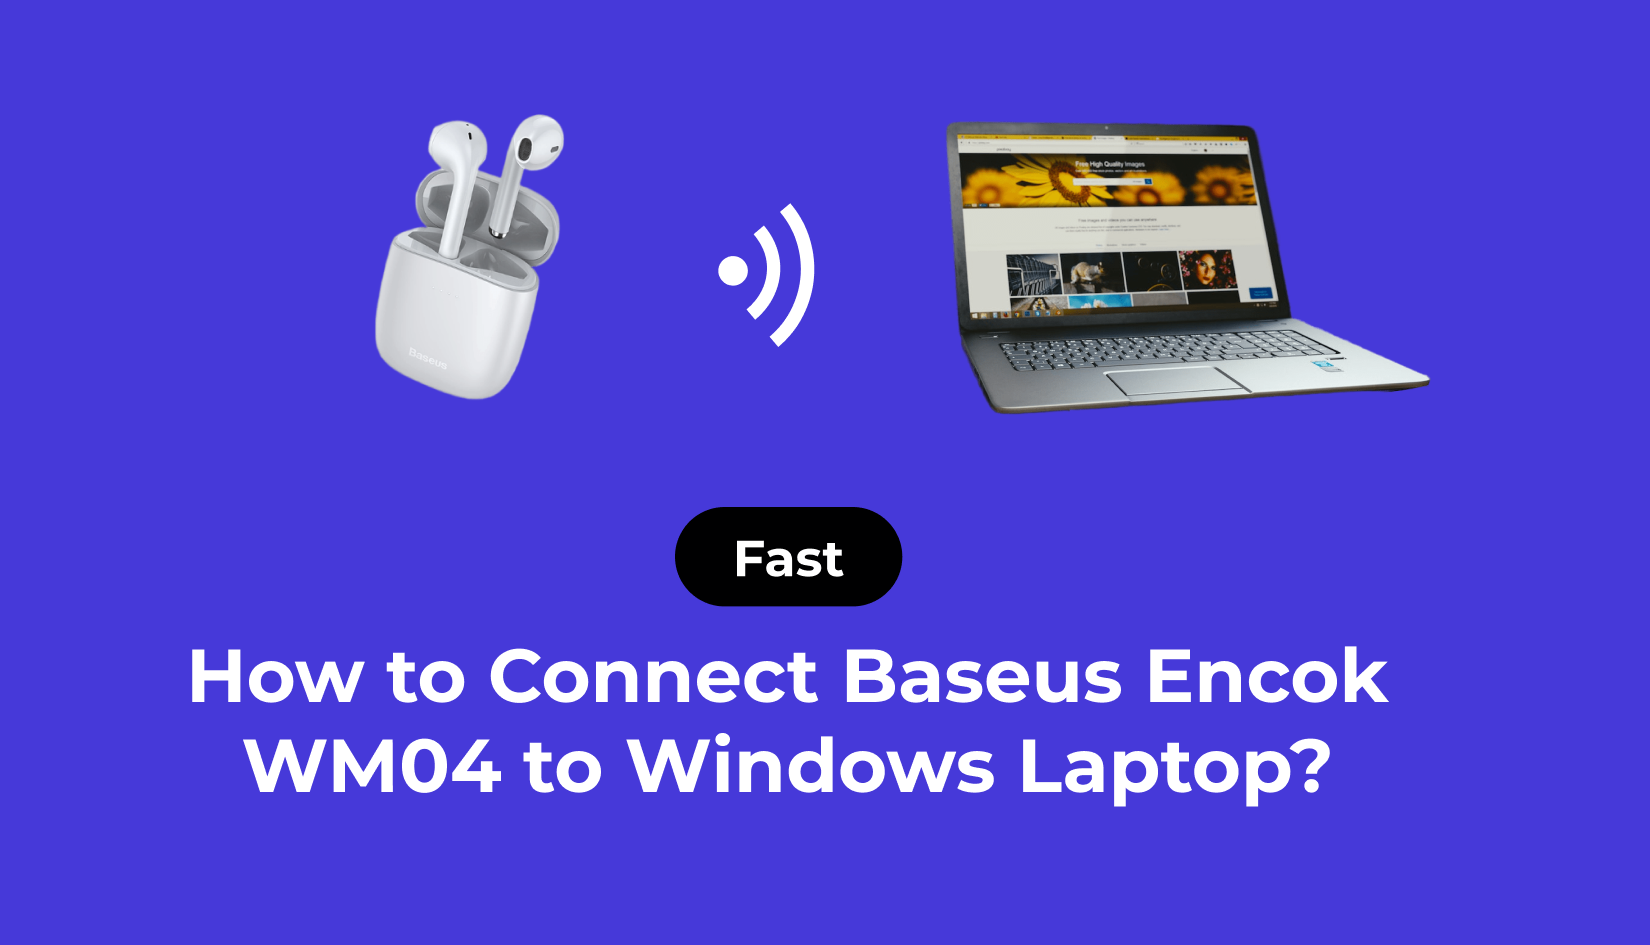 How to Connect Baseus Encok WM04 to Windows Laptop? (Fast)